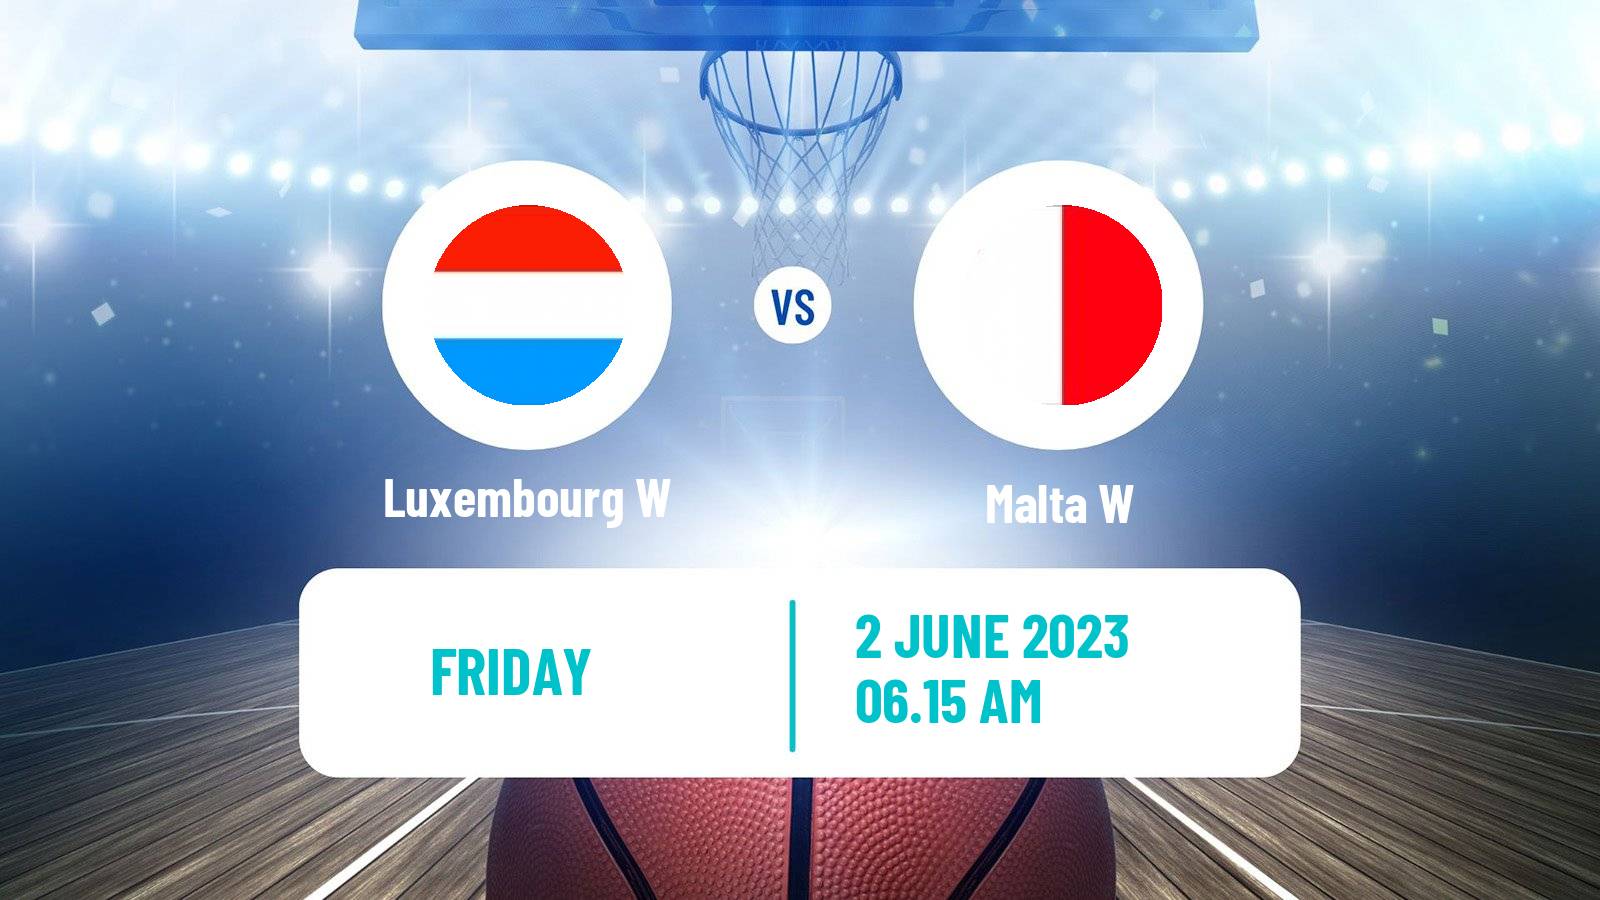 Basketball Games of the Small States of Europe Basketball Women Luxembourg W - Malta W